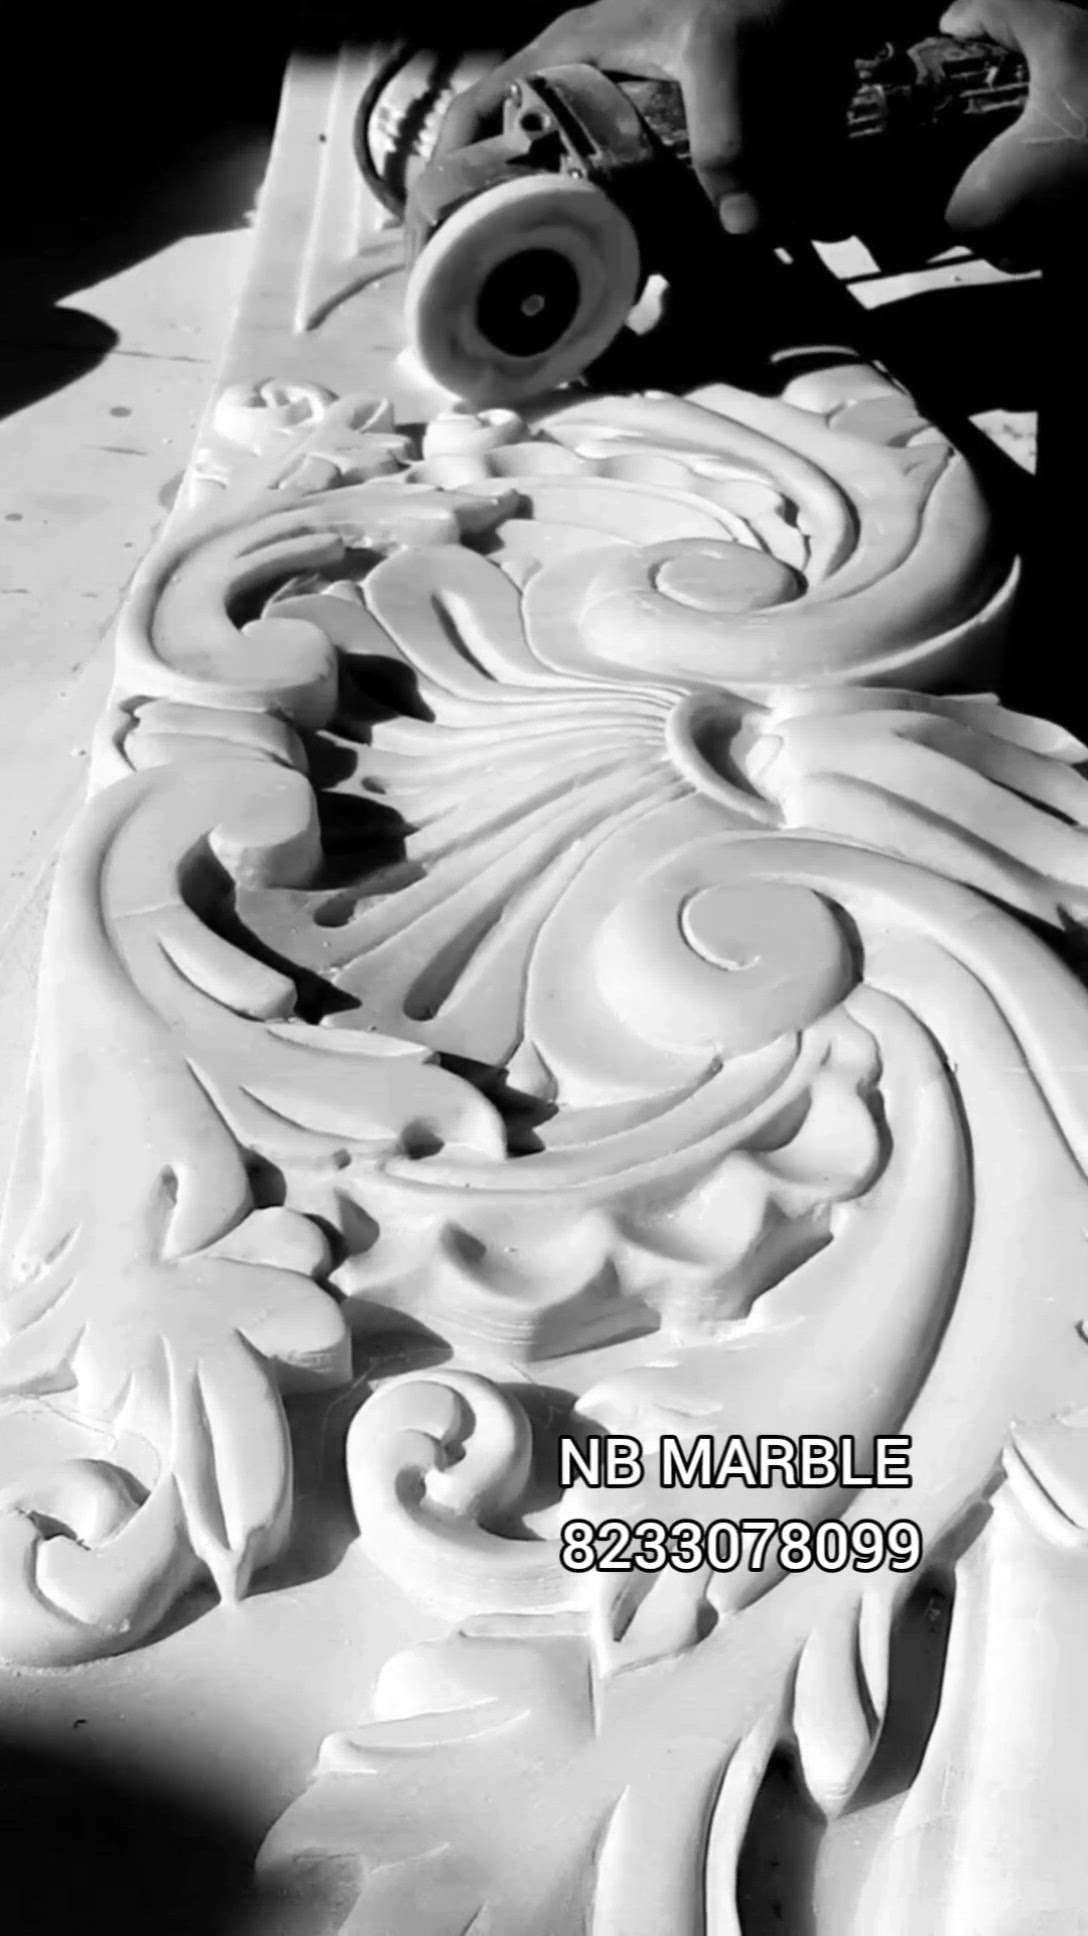 White Marble Carving Work 

Decor your home and temple with NB Marble 

We are manufacturer of marble and sandstone fountain, temple, sculpture, inlay work.

We make any design according to your requirement and size 

Follow me @nbmarble 

More information contact me 
8233078099
.
.
.
.
.
.
.
#fountain #fountainwork #sculpturefountain #sculpture #marblework #inlaywork #homedecor #templevisit #templearchitecture #carving